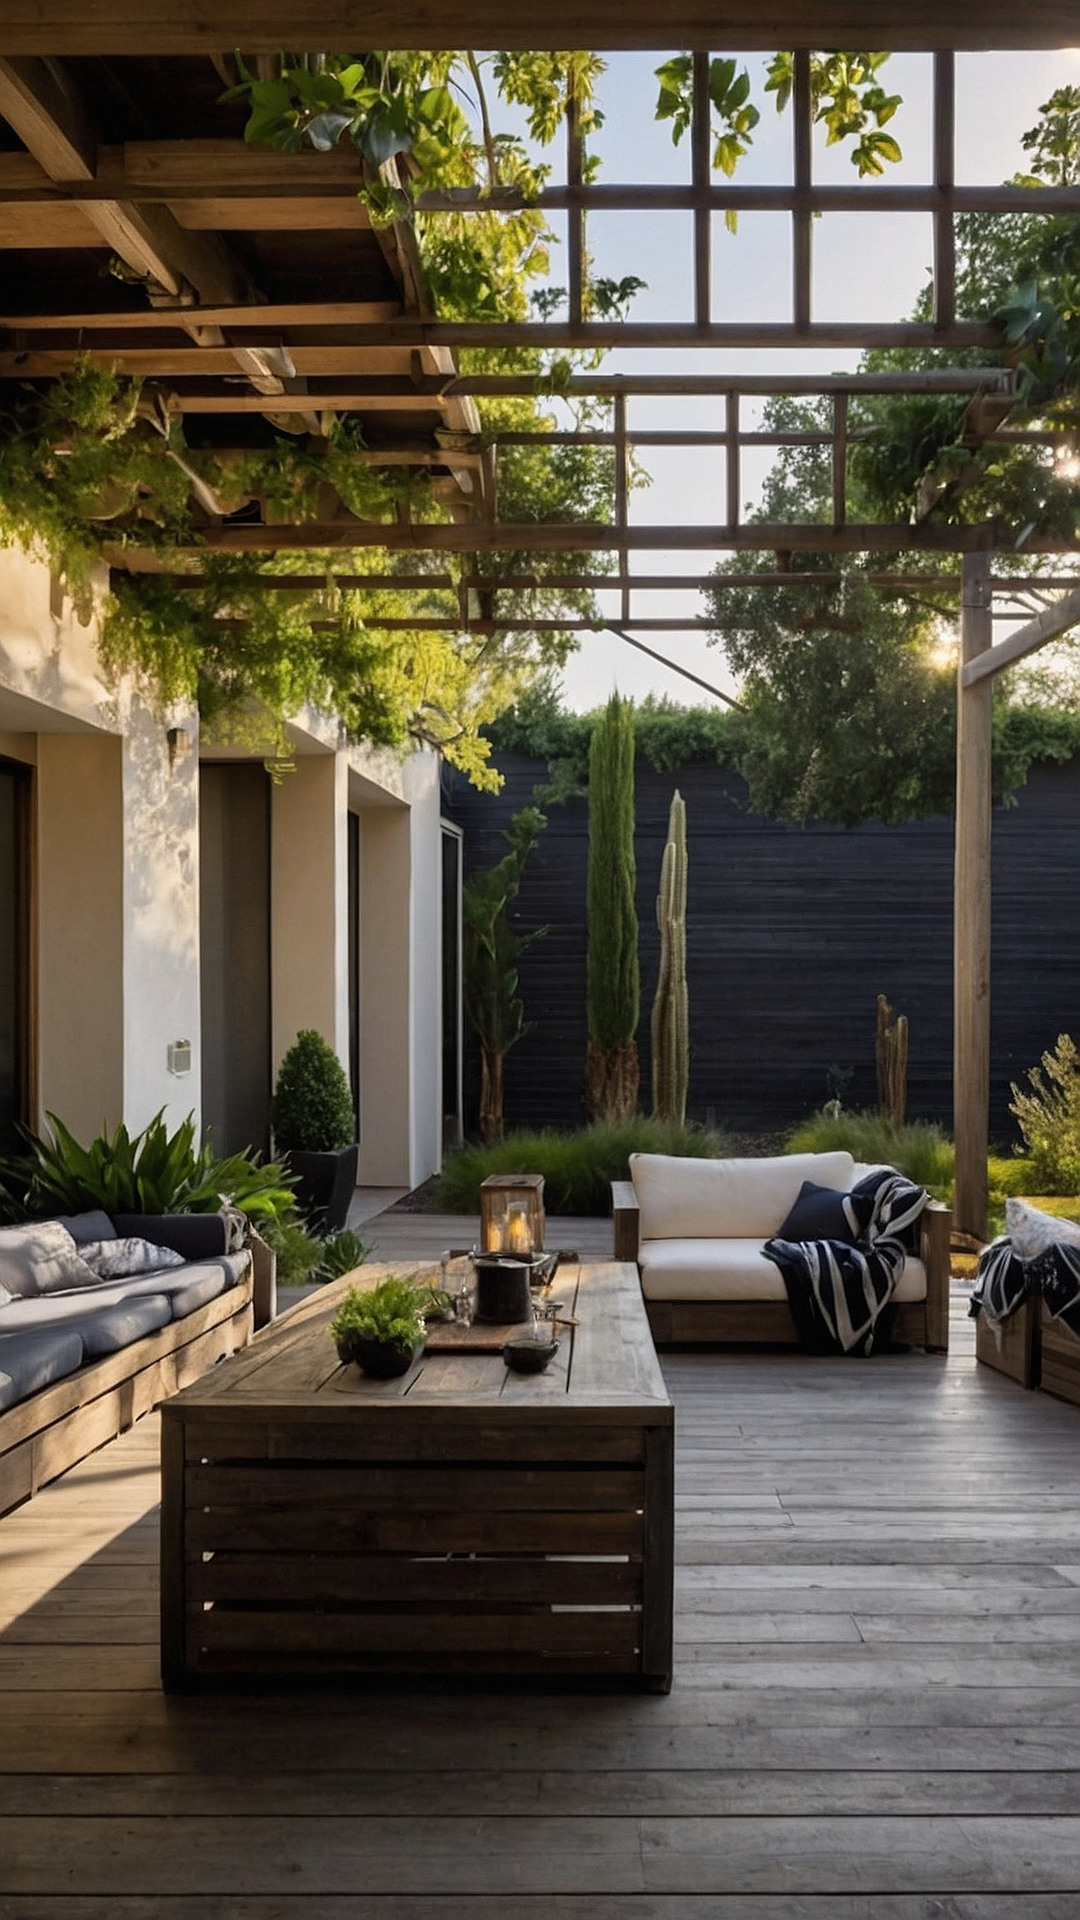 Decked Out: Outdoor Decor Delights